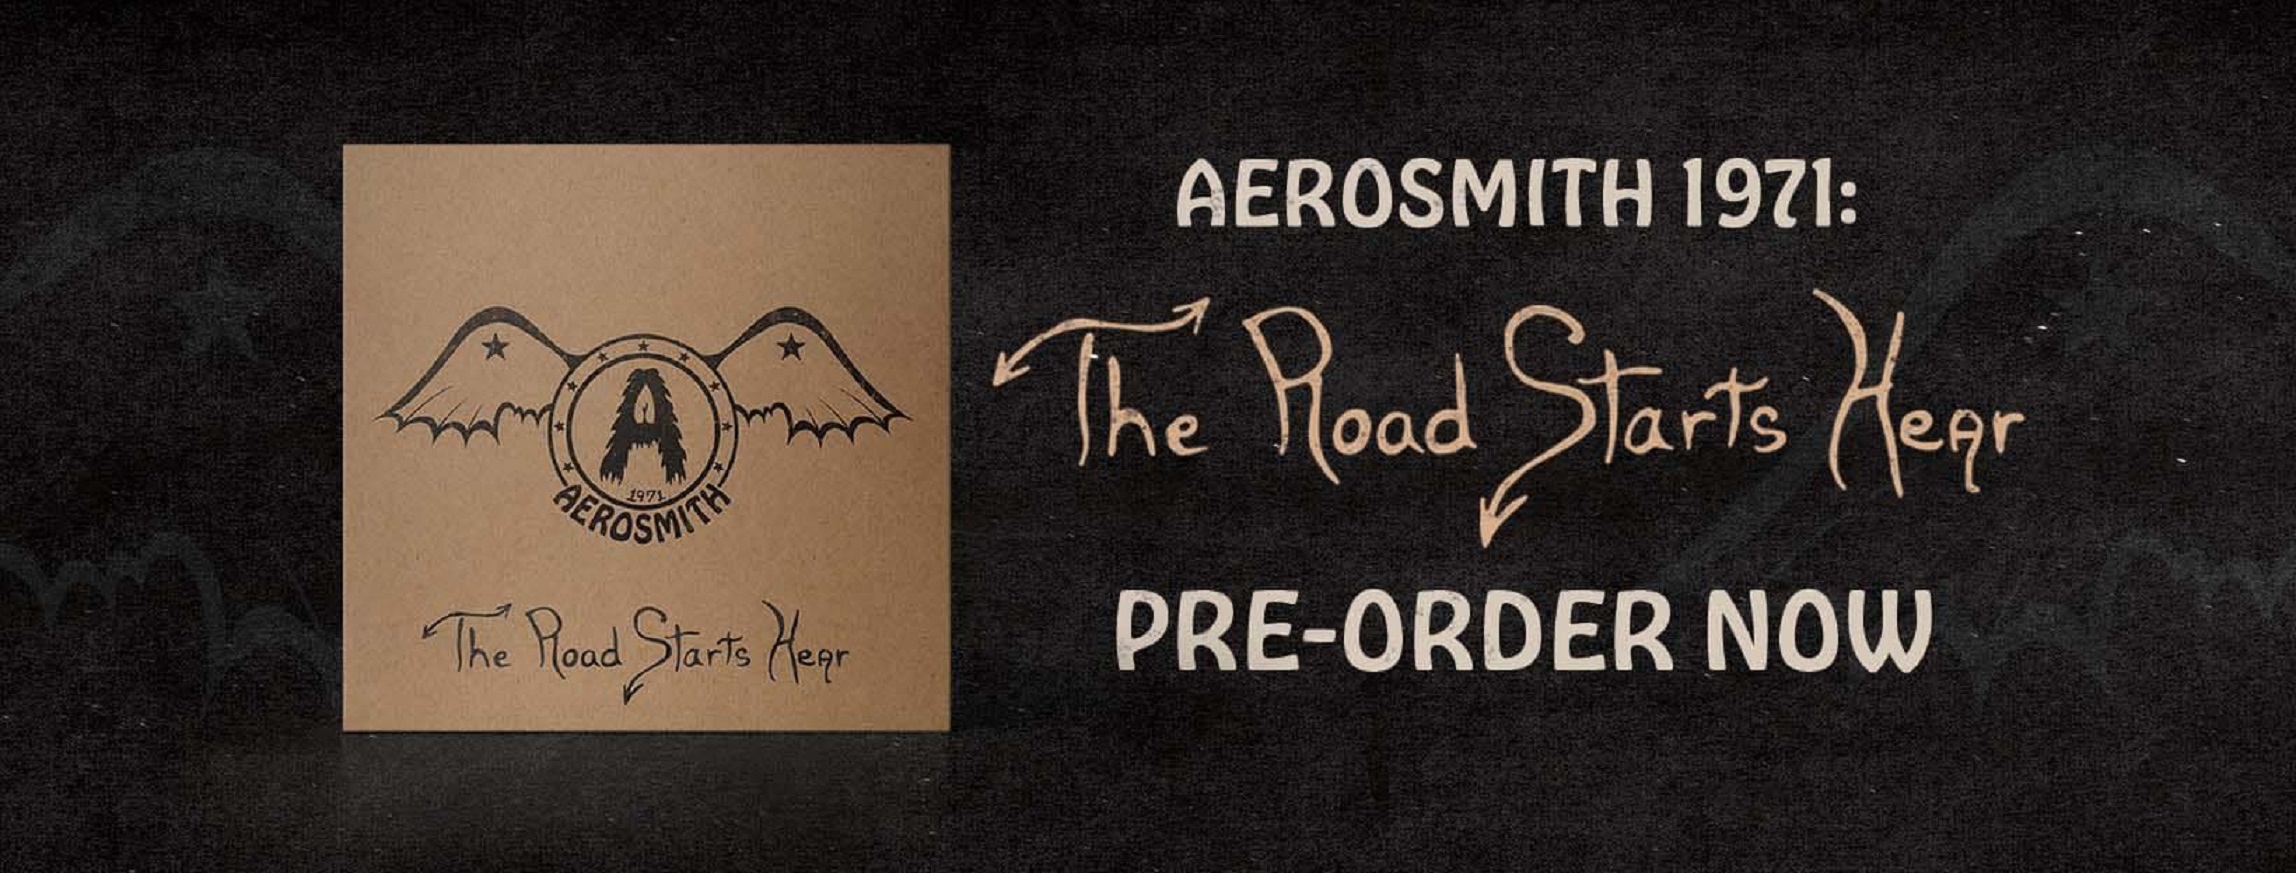 'AEROSMITH – 1971: THE ROAD STARTS HEAR’ Makes Its CD And Digital Debut On April 8 In The Ongoing Celebration Of The Band's 50th Anniversary